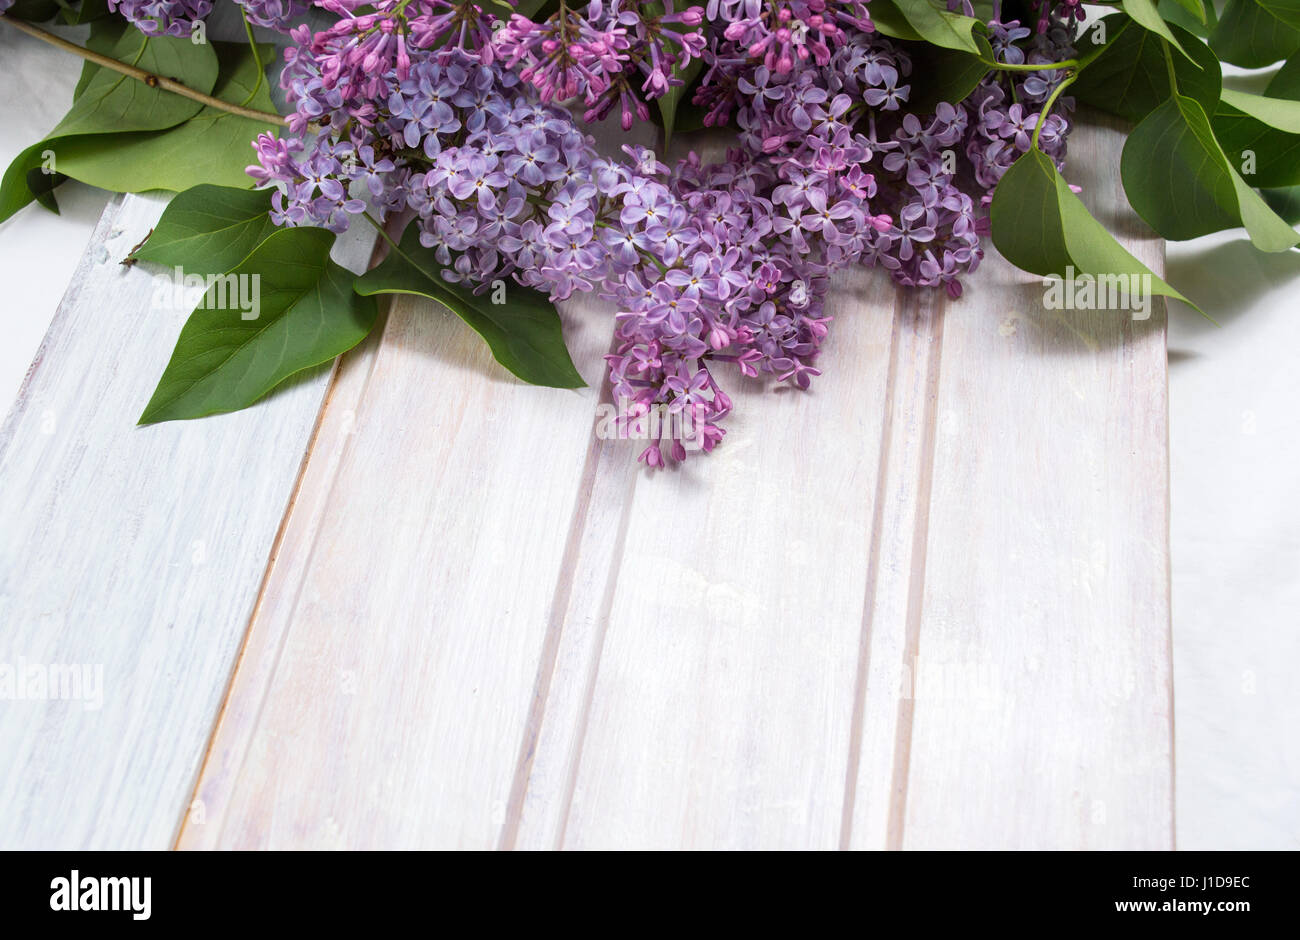 Fresh lilac spring flowers on a wooden table Stock Photo